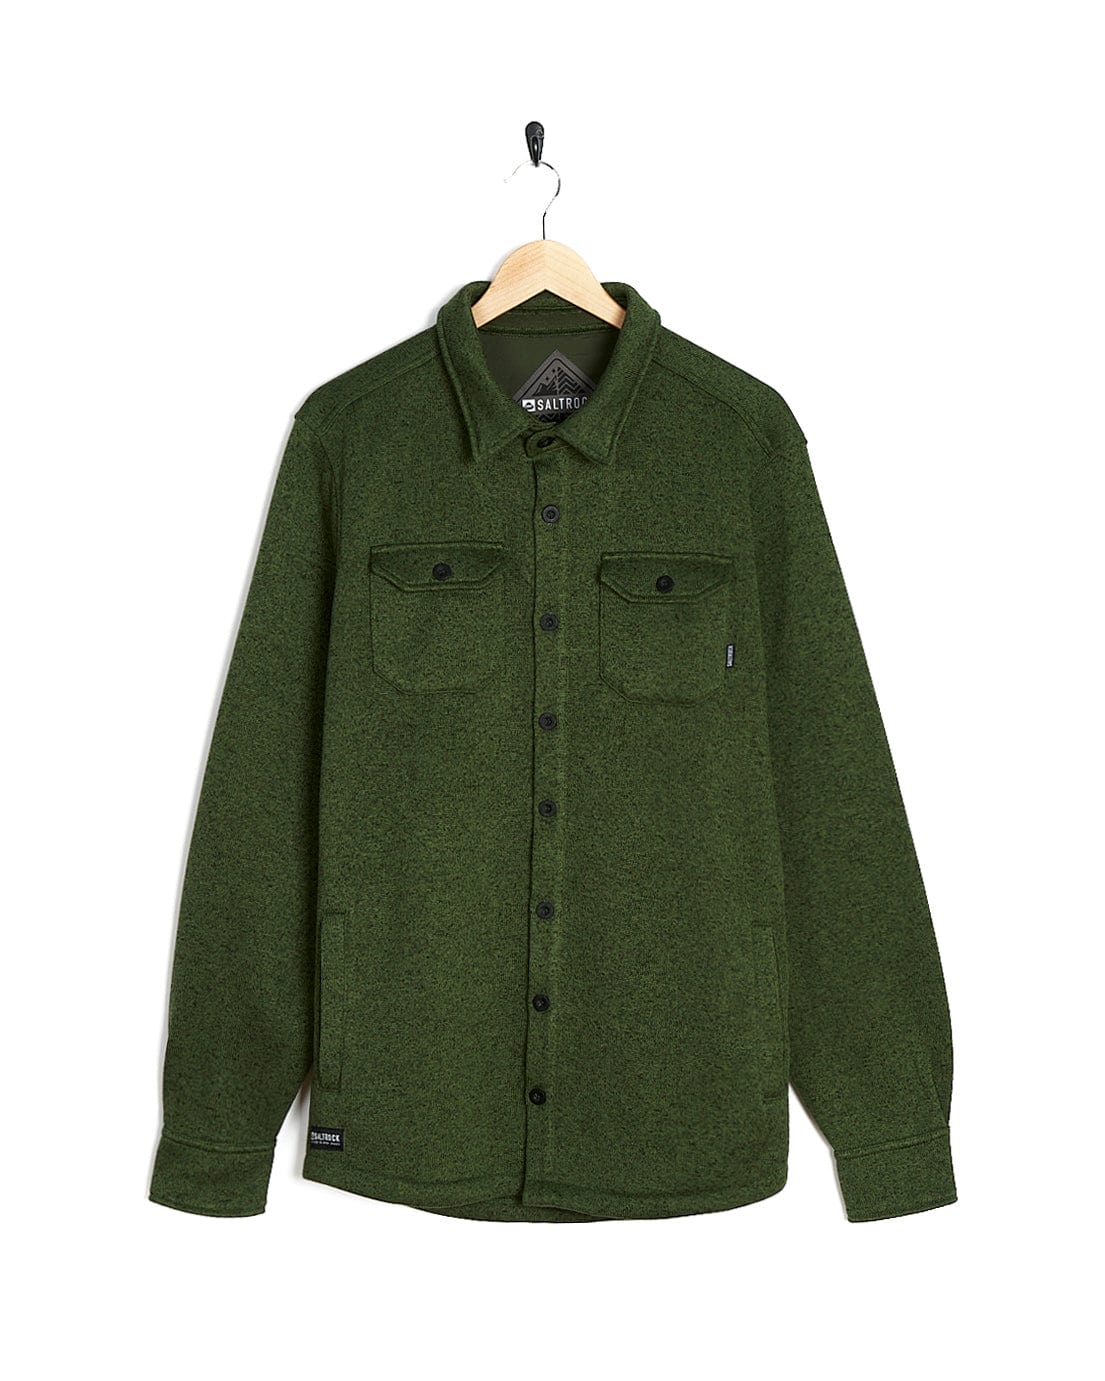 The Saltrock Levick - Mens Long Sleeve Shirt, with a stylish look, is hanging on a hanger.